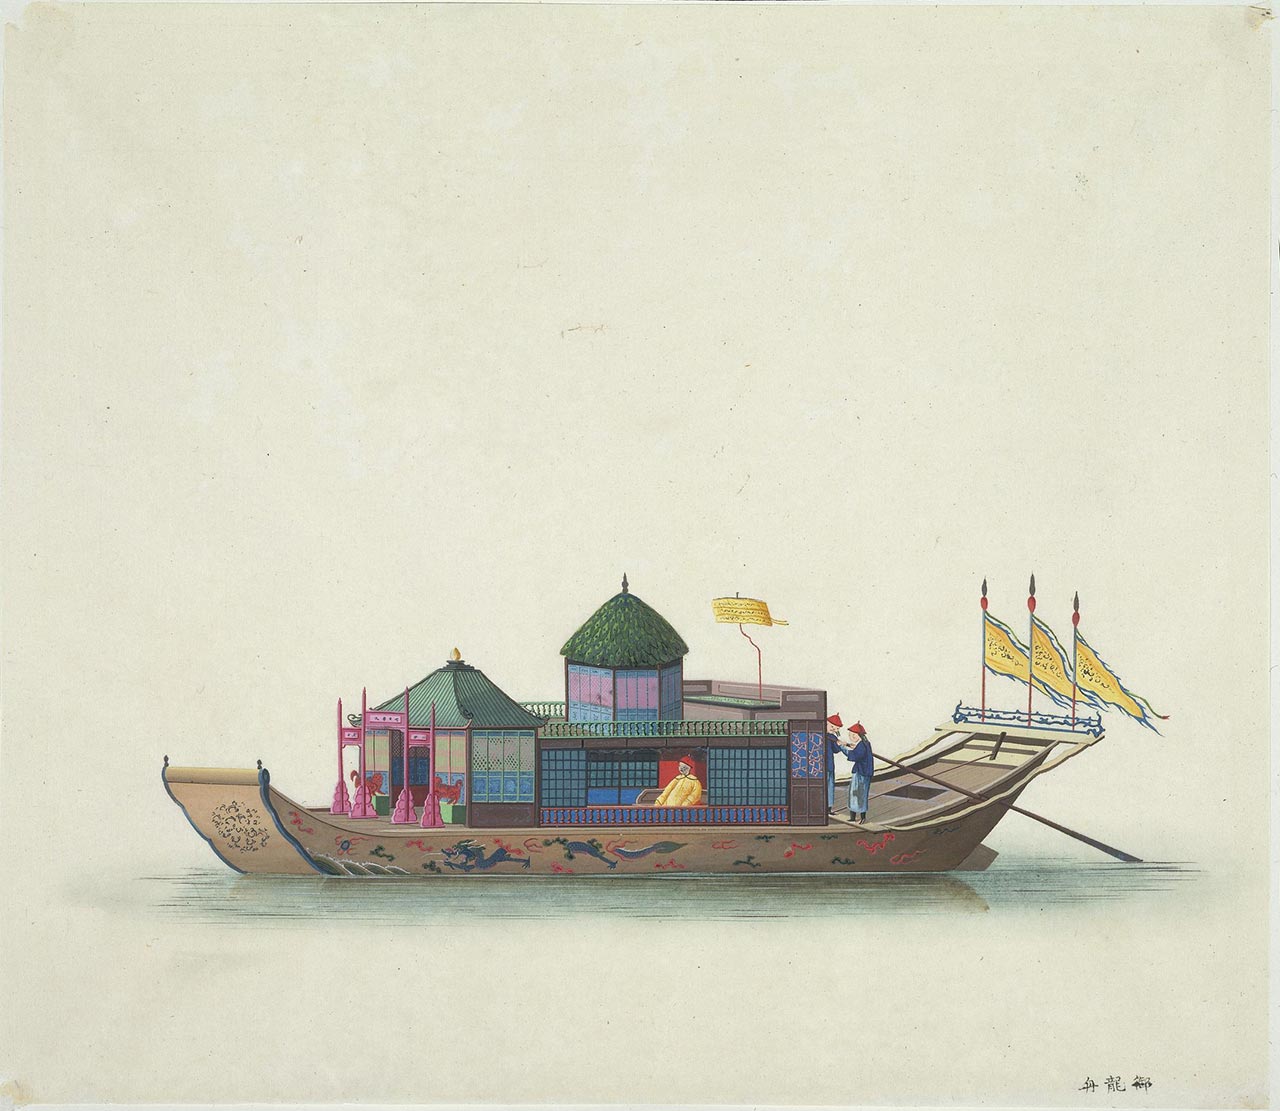 A Chinese emperor's boat. In the early 19th century the Chinese emperor Jiaqing never made a trip to Canton, so the painting is likely to have been a product of the artist's imagination rather than drawn from life. 